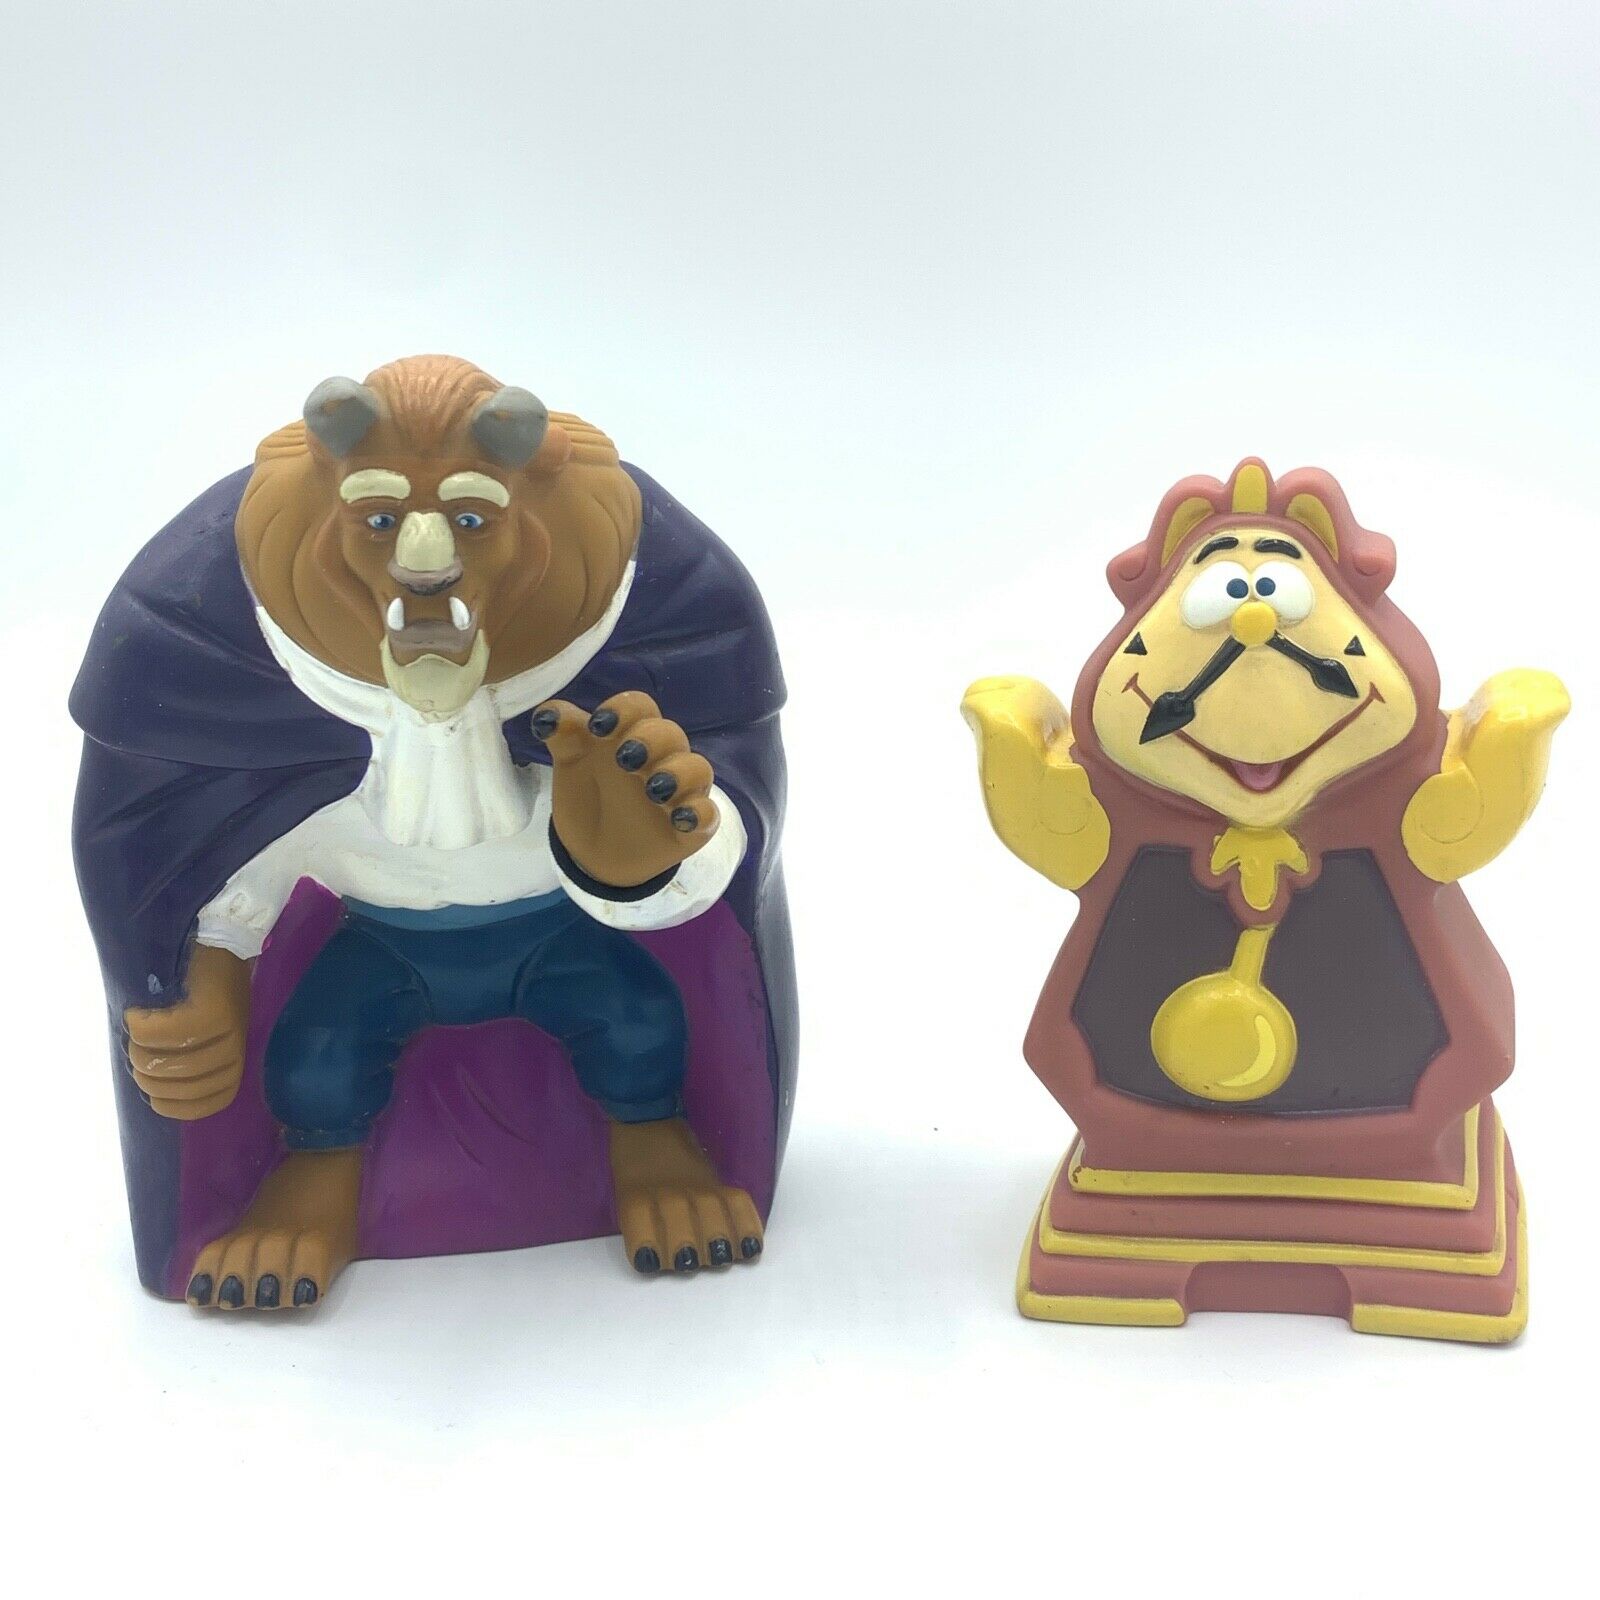 1992 Disney Beauty & The Beast Pizza Hut Figure Hand Puppet Rubber Cogsworth Toy